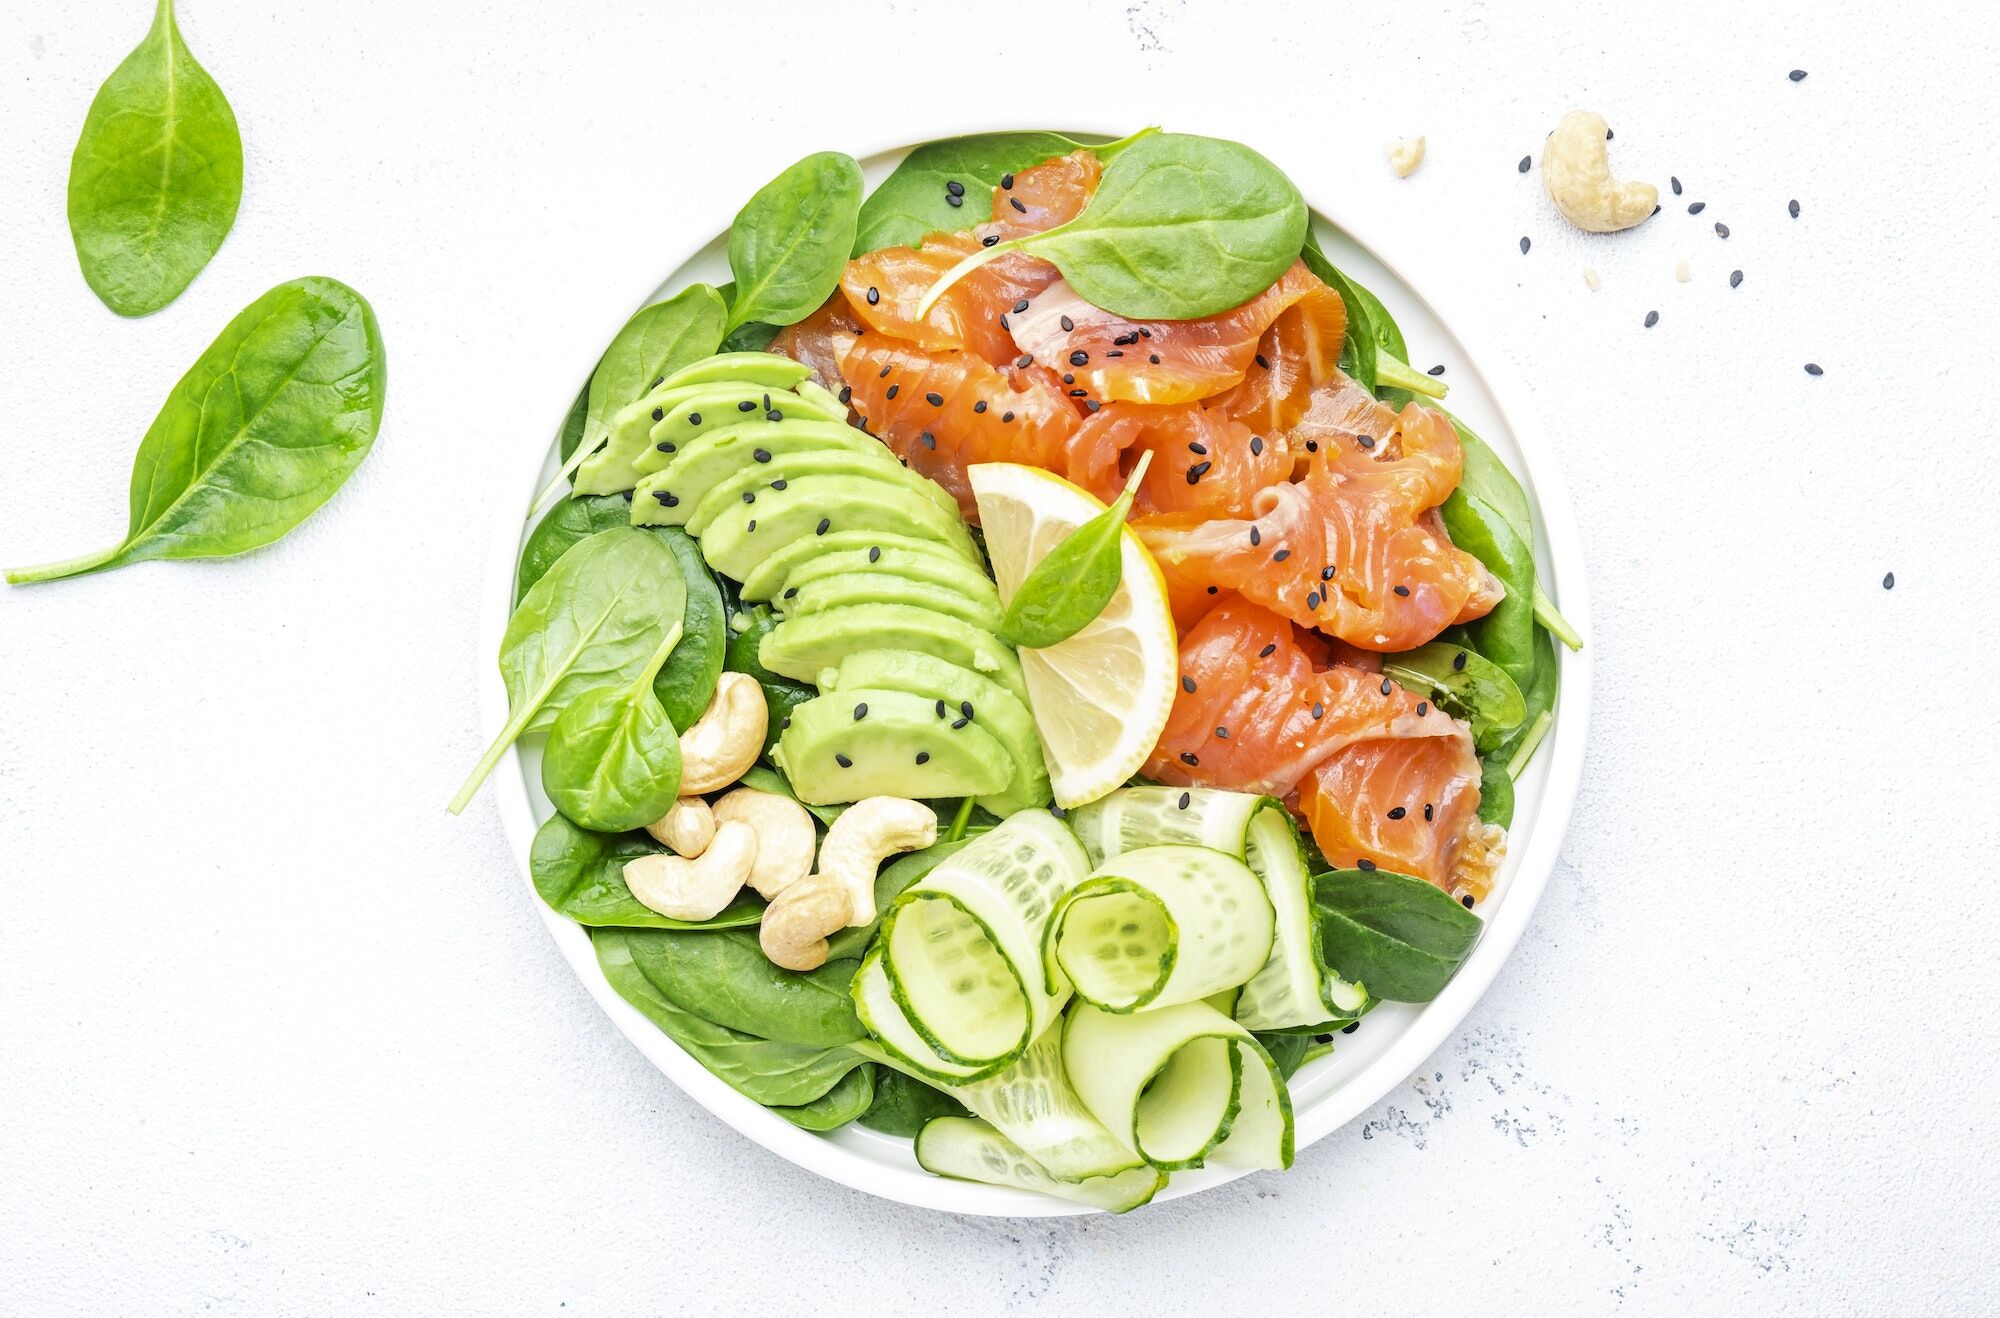 Salmon salad for ketogenic diet with avocado, spinach, cucumber, cashew nuts